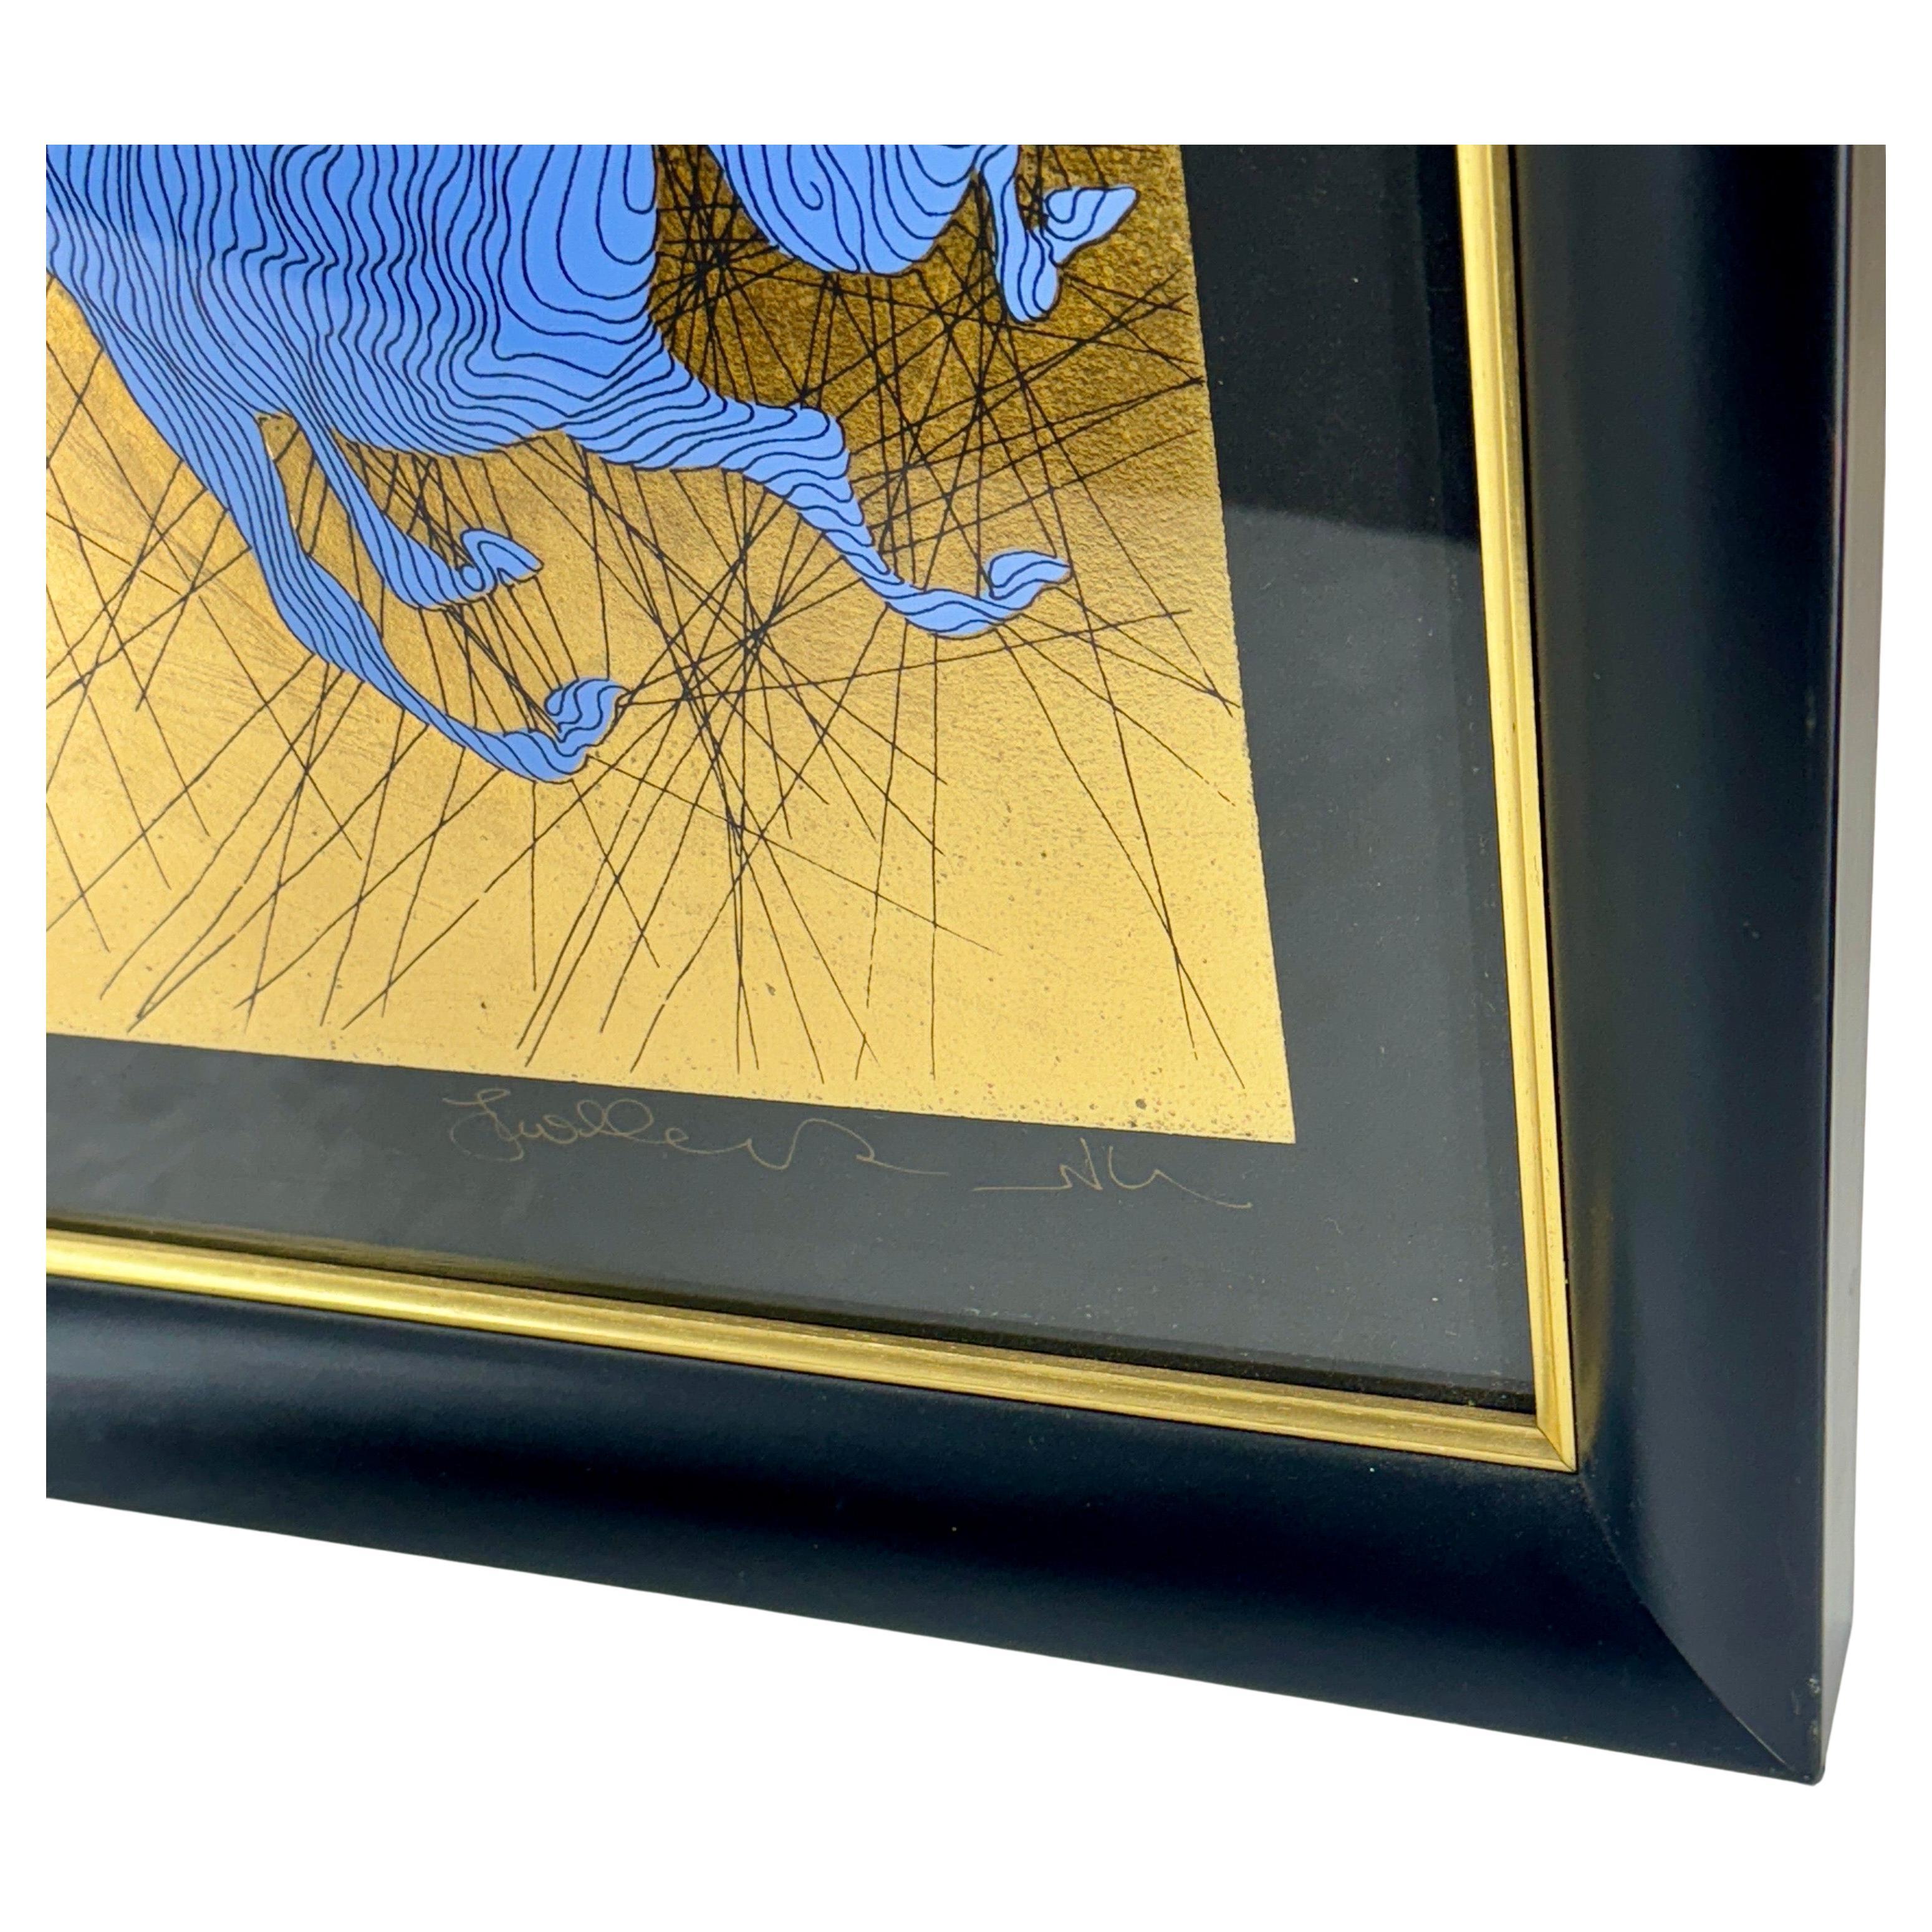 Guillaume Azoulay Equus Gold Leaf Running Horse Serigraph Limited Edition 12/12 For Sale 5